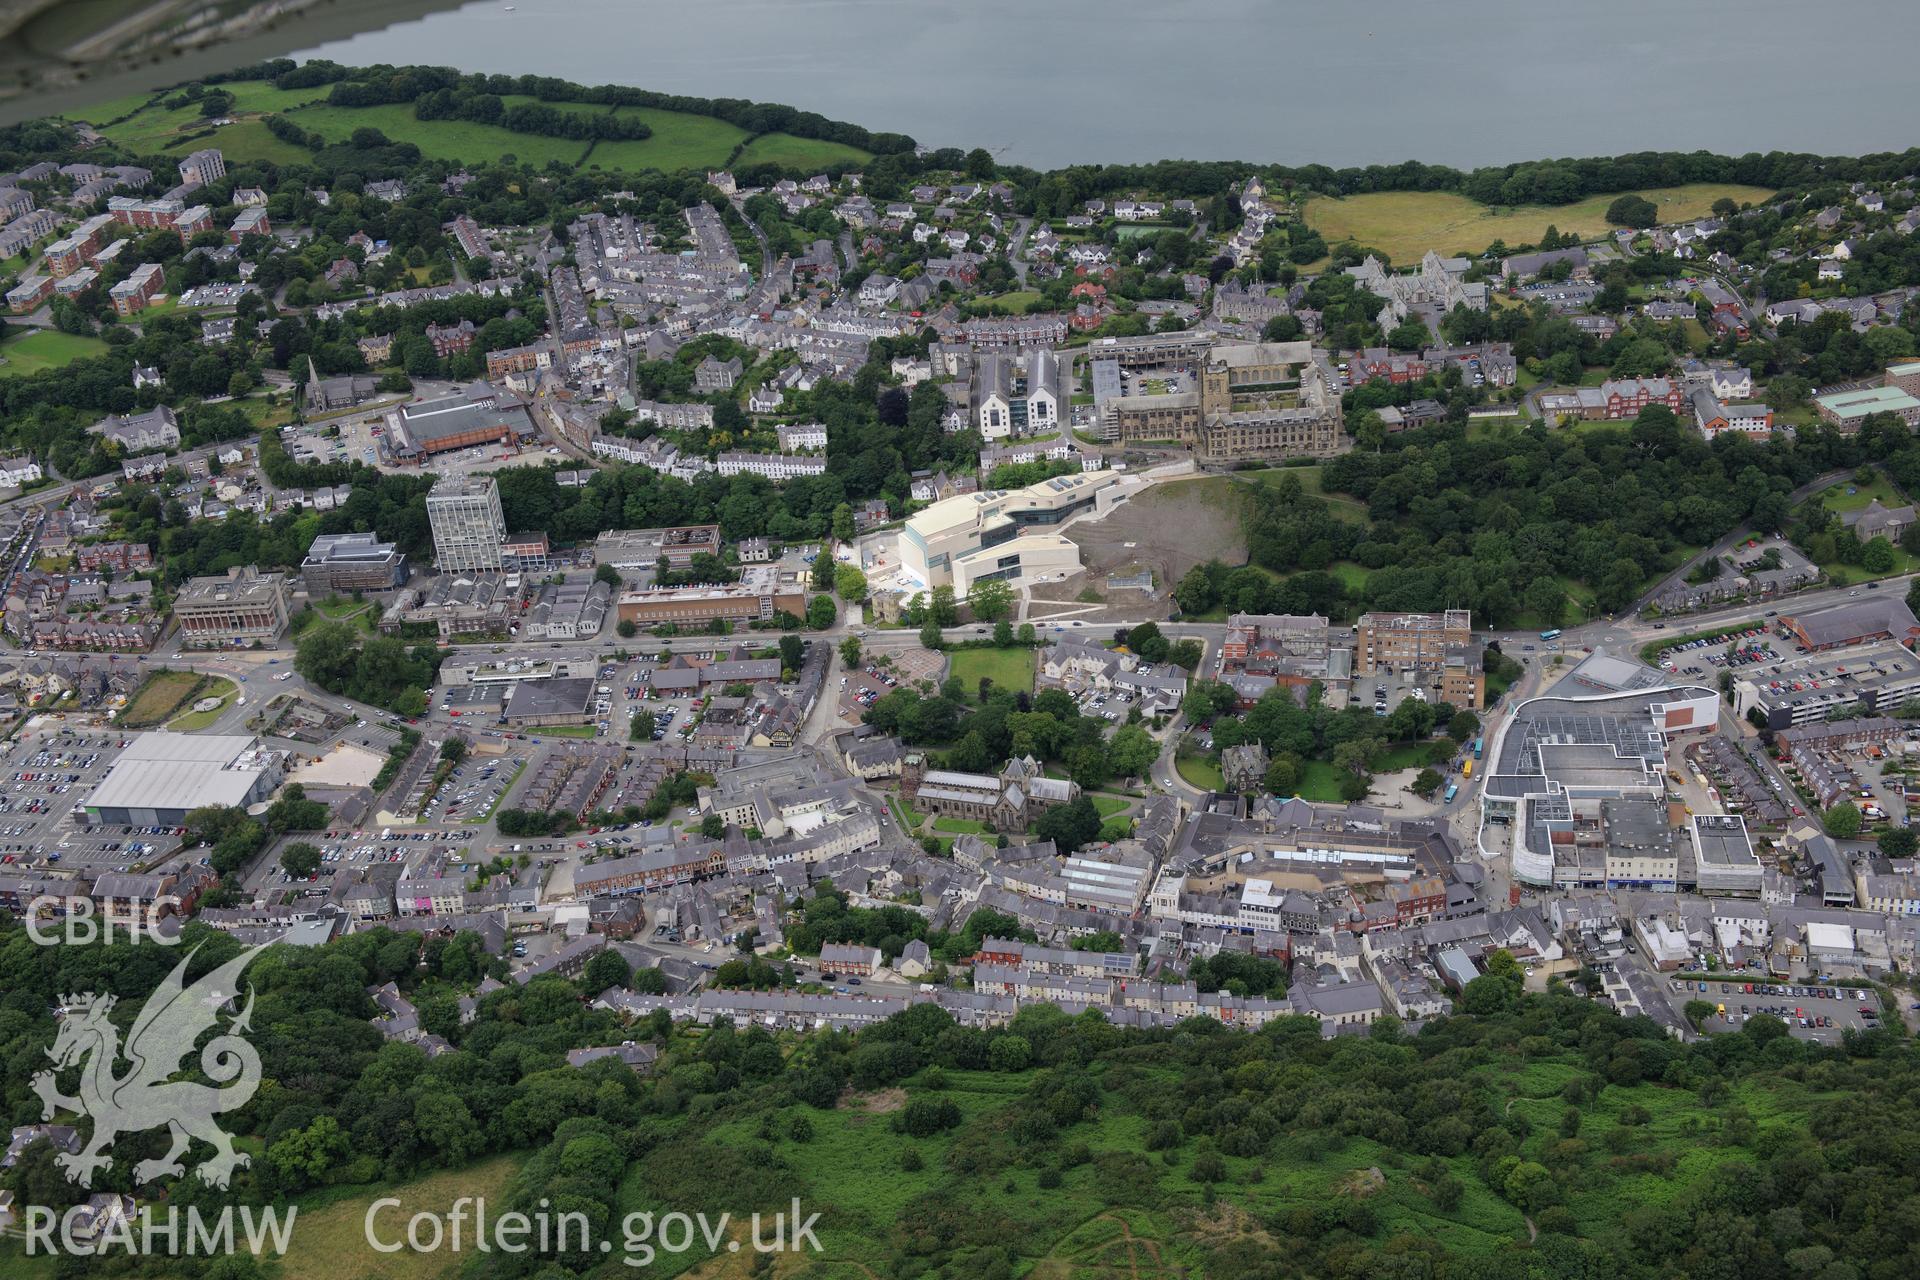 Bangor Cathedral, University, Theatr Gwynedd(demolished),Pontio, medieval church site,Catholic church & museum. Oblique aerial photograph taken during the Royal Commission's programme of archaeological aerial reconnaissance by Toby Driver on 30th July 2015.